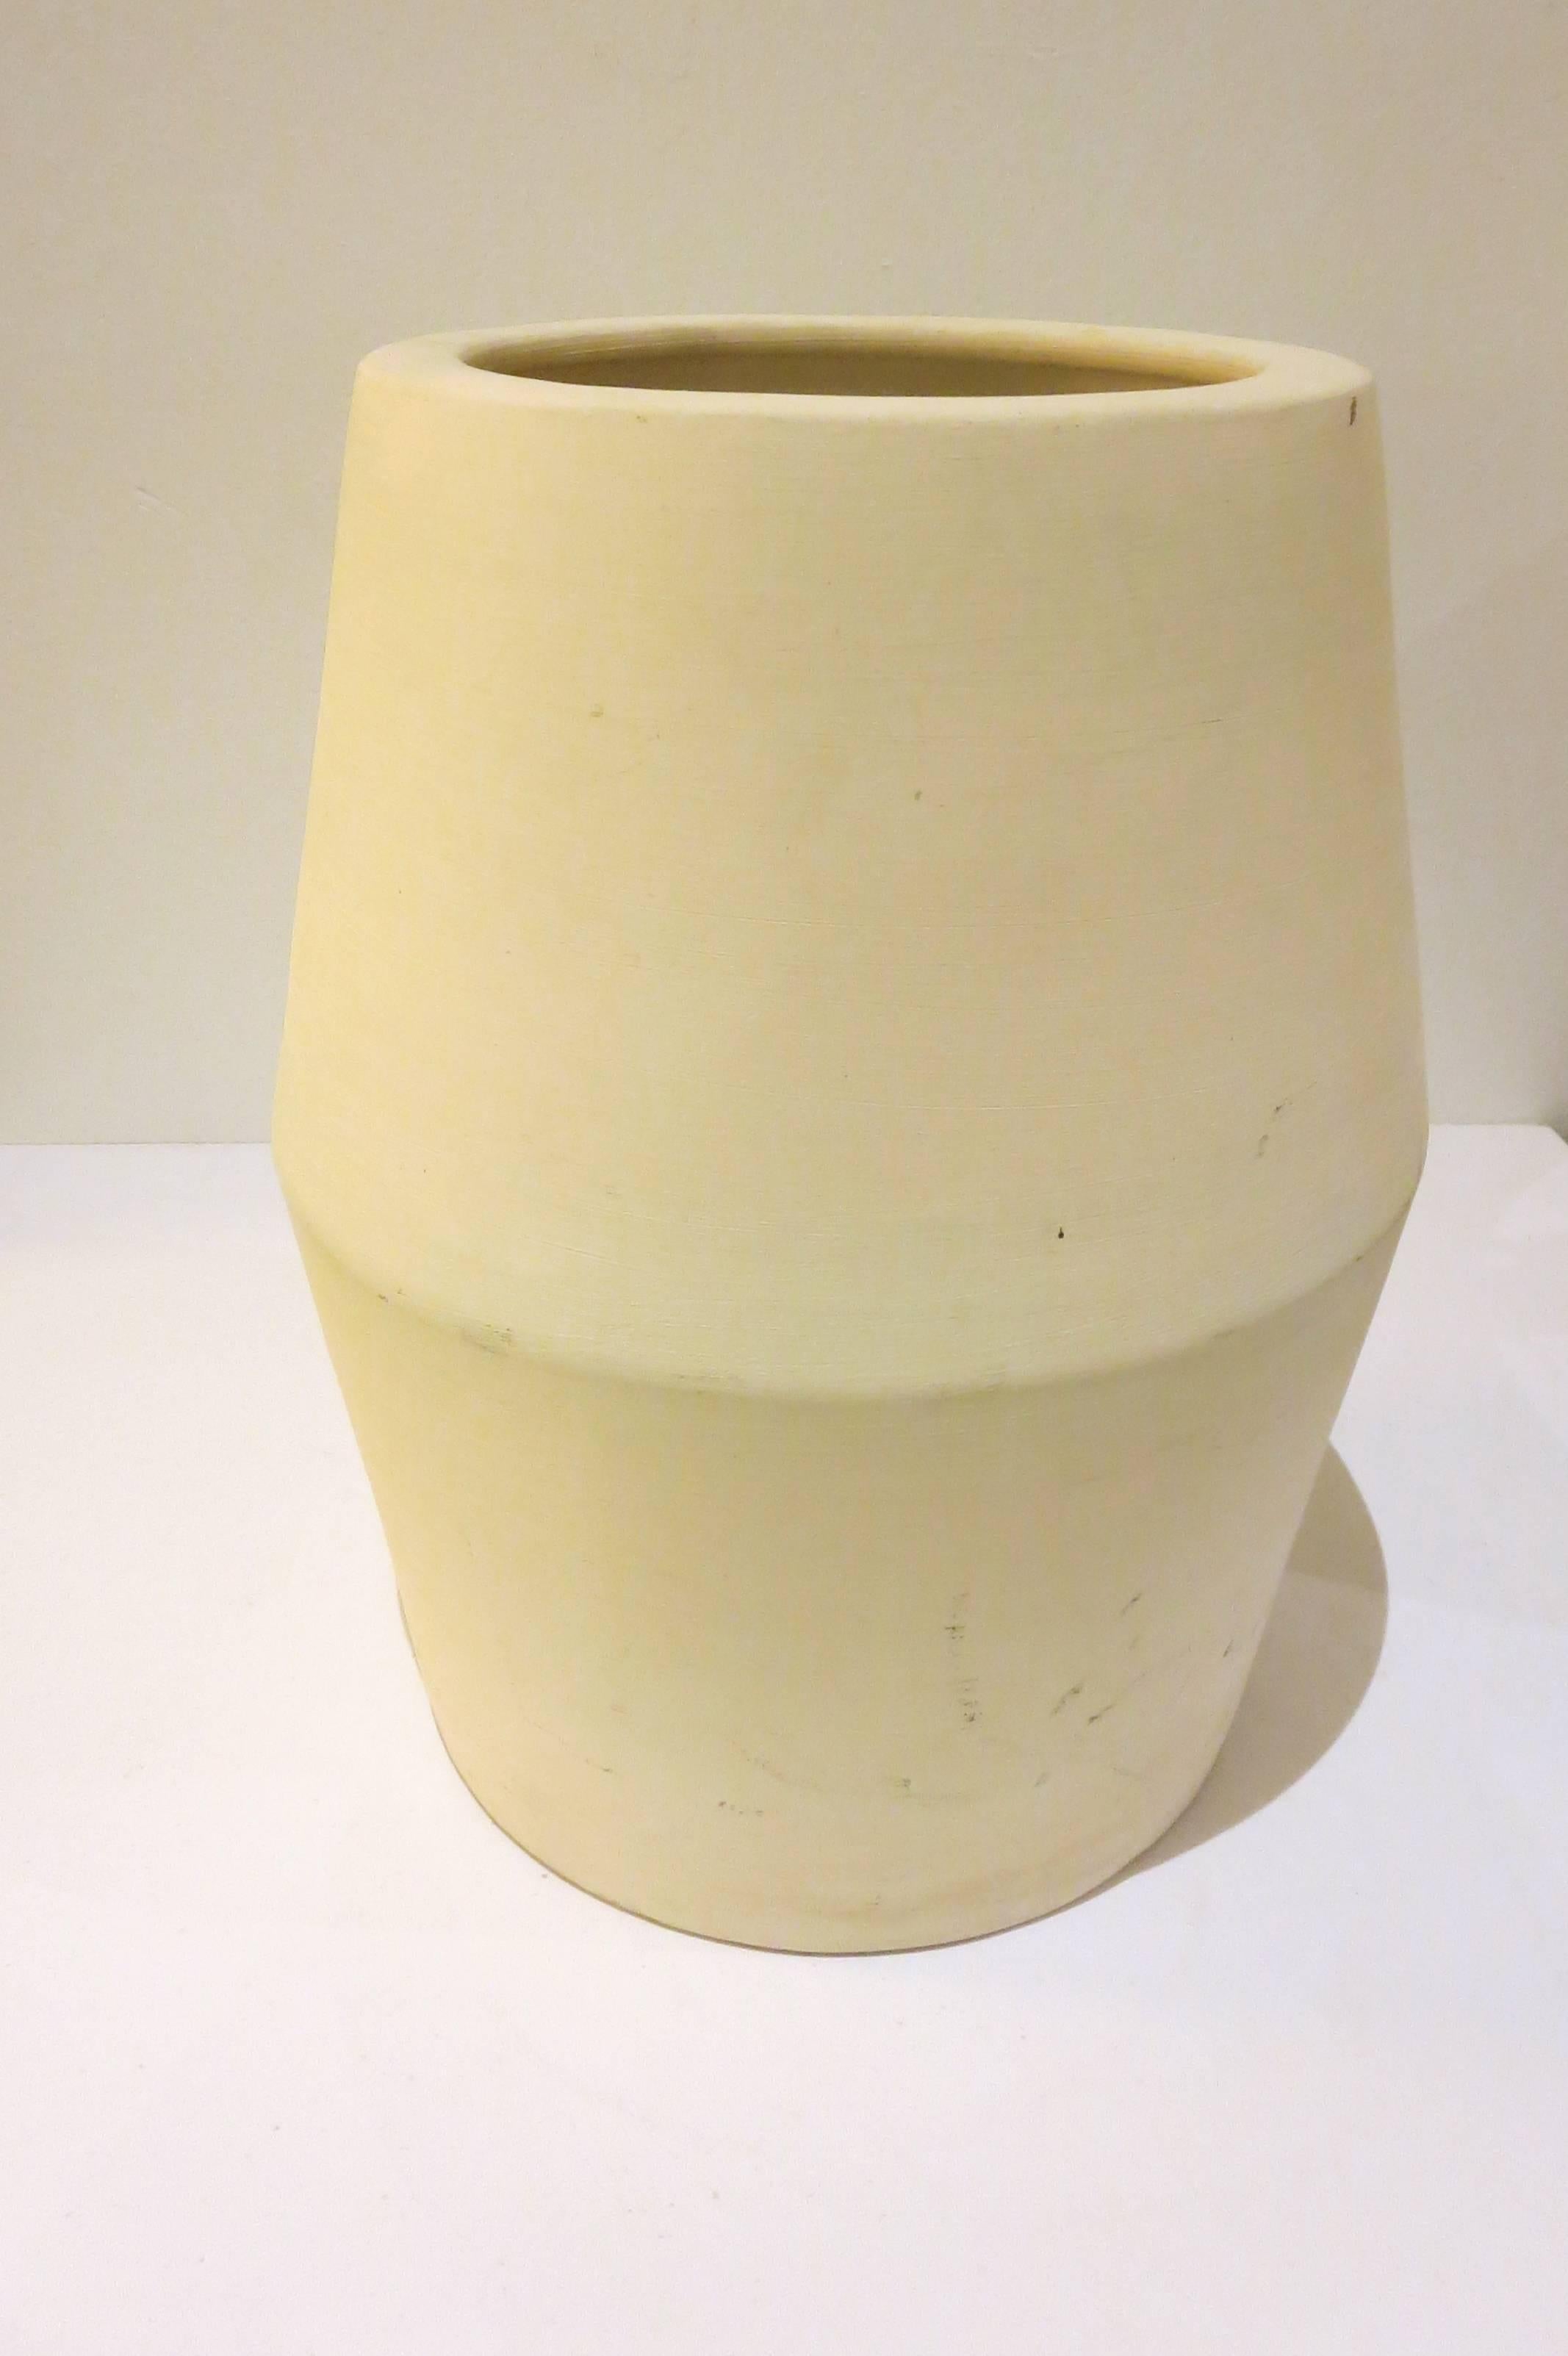 Nice and rare shape on this planter designed by Legardo Tackett for Architectural Pottery, circa 1960s. In Bisque finish perforated at the bottom for drain. Unmarked early production, very nice and clean condition no chips or cracks.